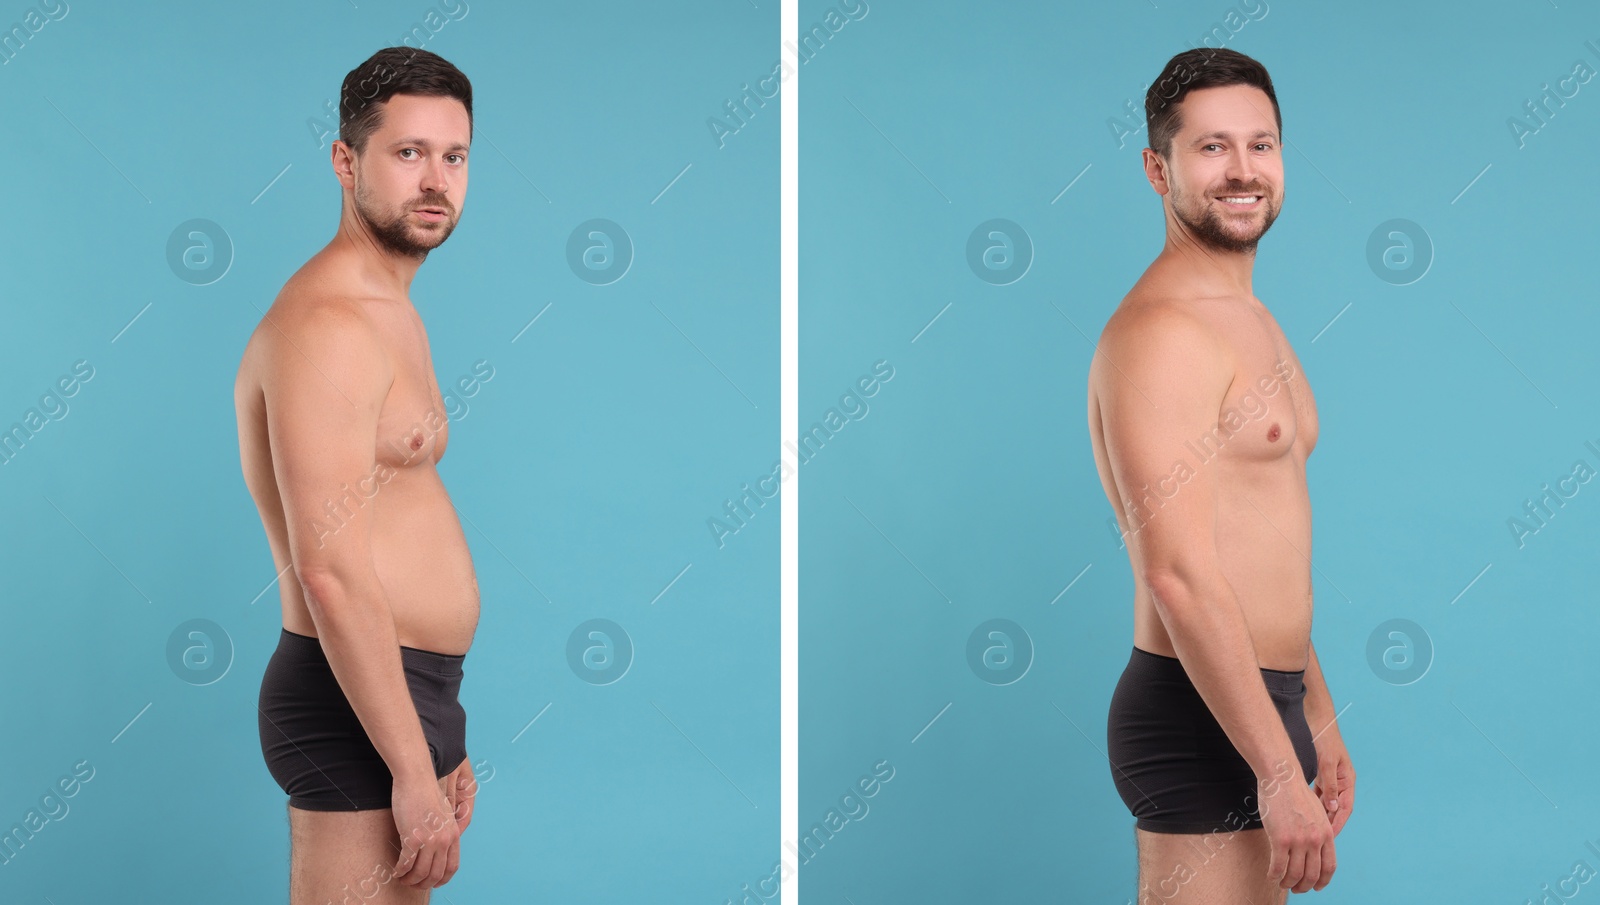 Image of Collage with portraits of man before and after weight loss on light blue background